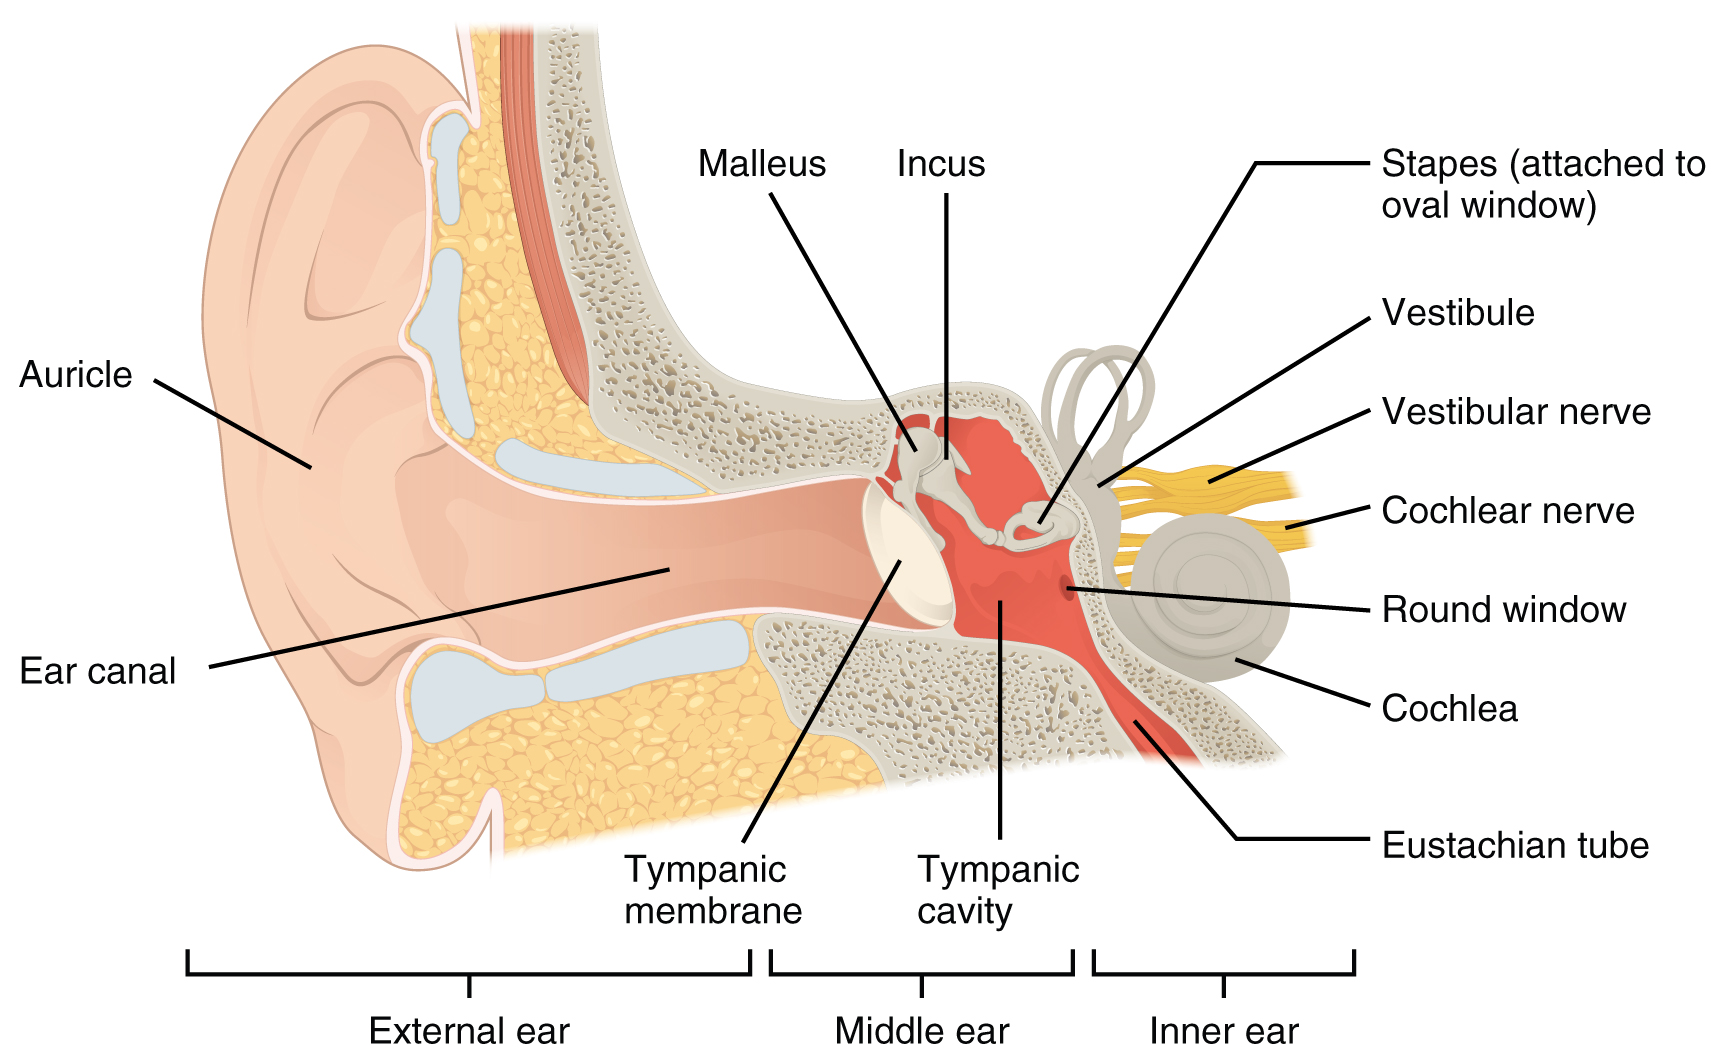 This image shows the structure of the ear with the major parts labeled.